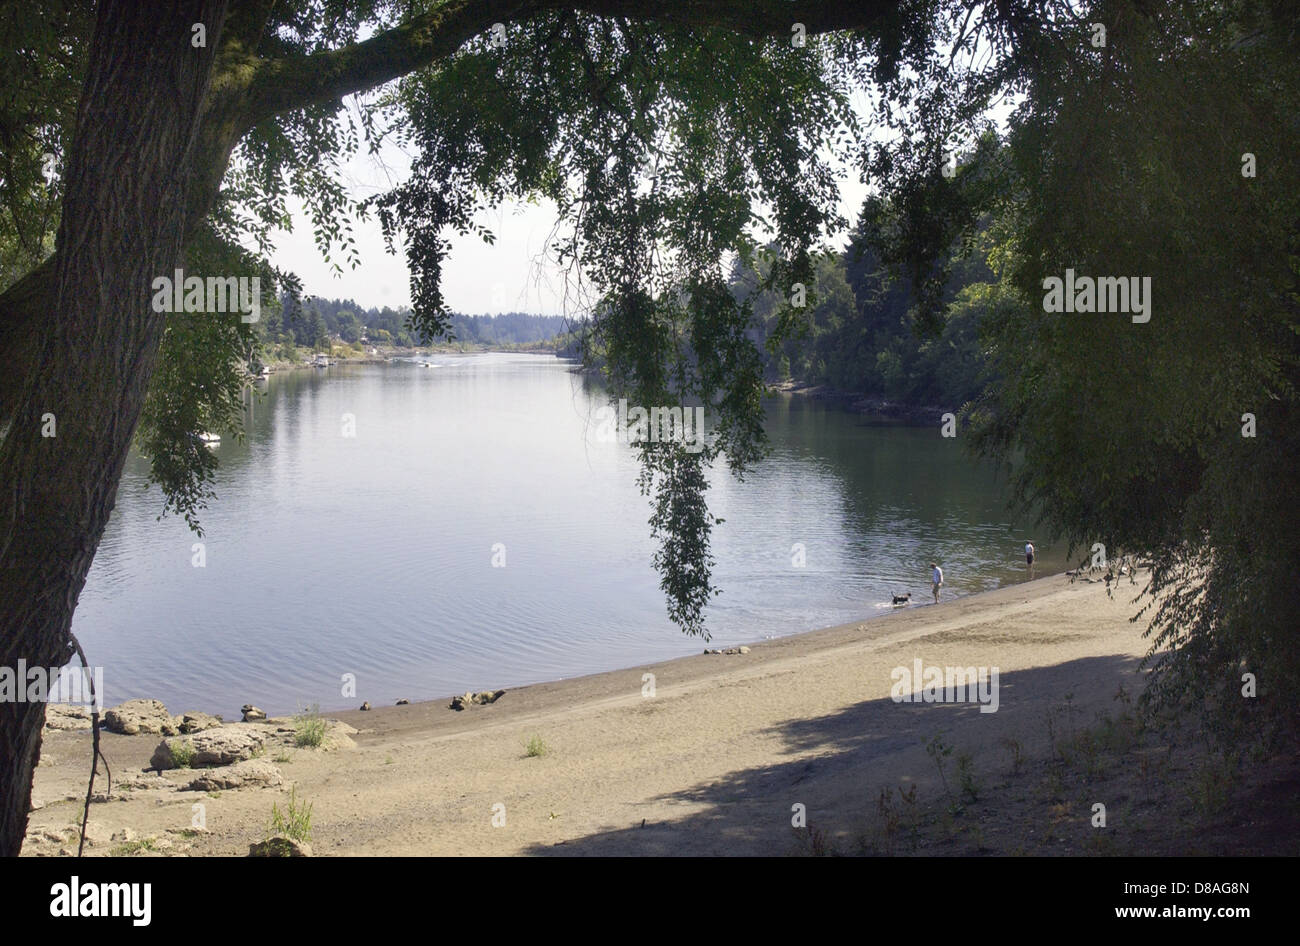 Willamette River at Lake Oswego Oregon,irrigation, river,Salmon, trout, Clackamas, Willamette River tributary of Columbia River, Stock Photo